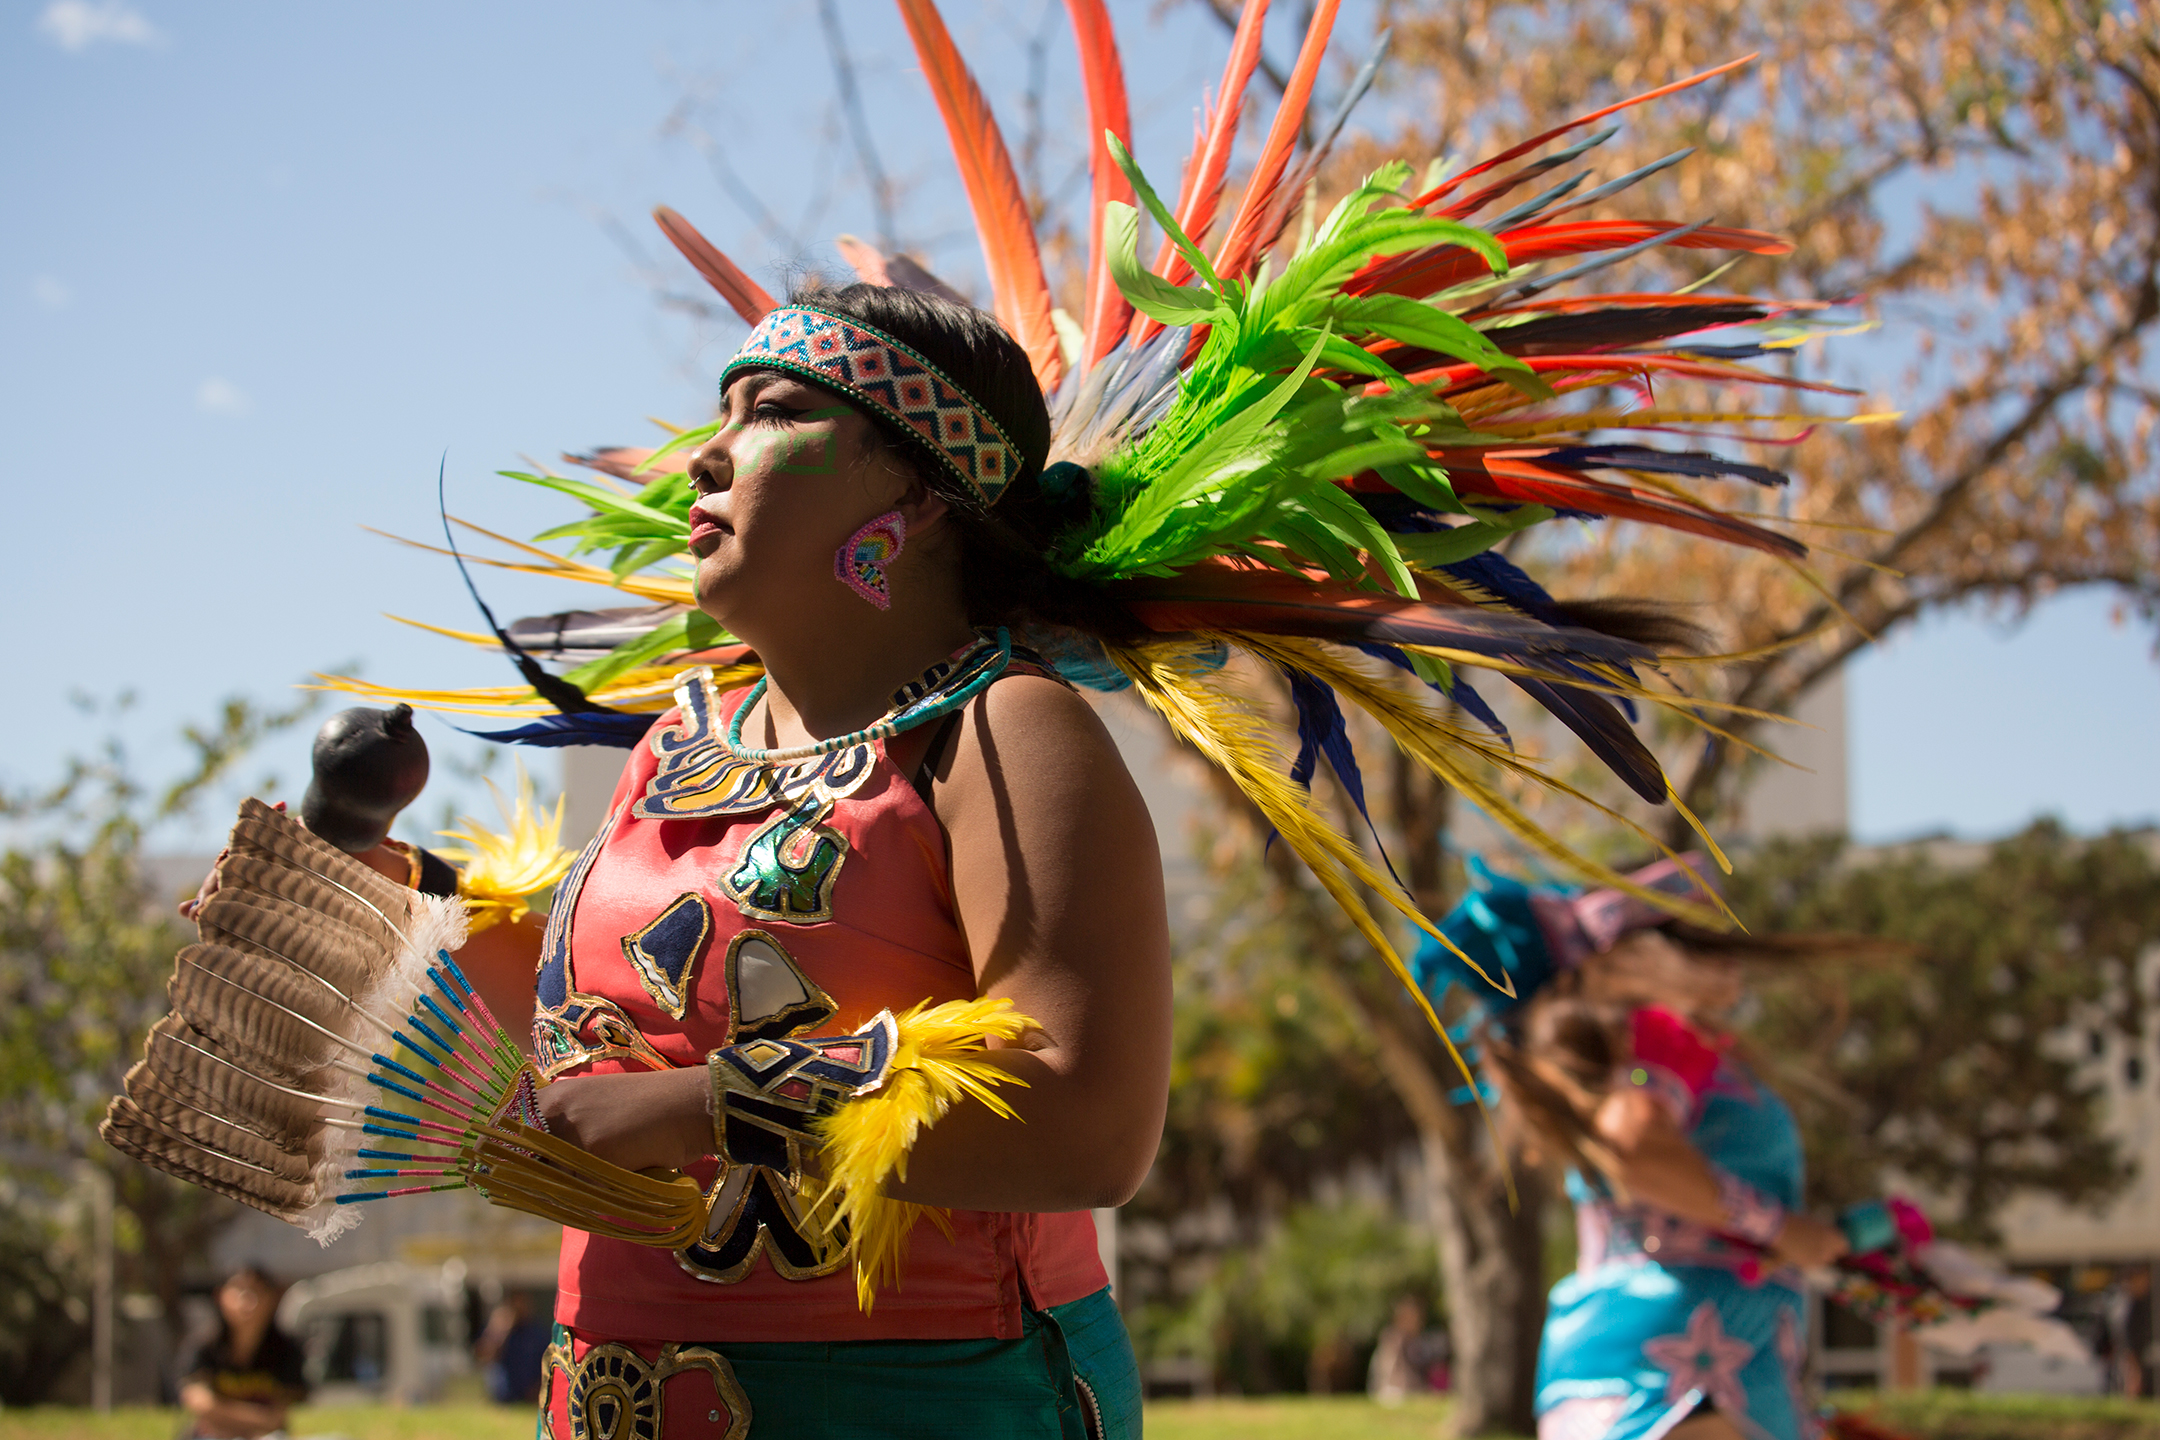 A Native American woman in a colorful headdress looks left during a celebration